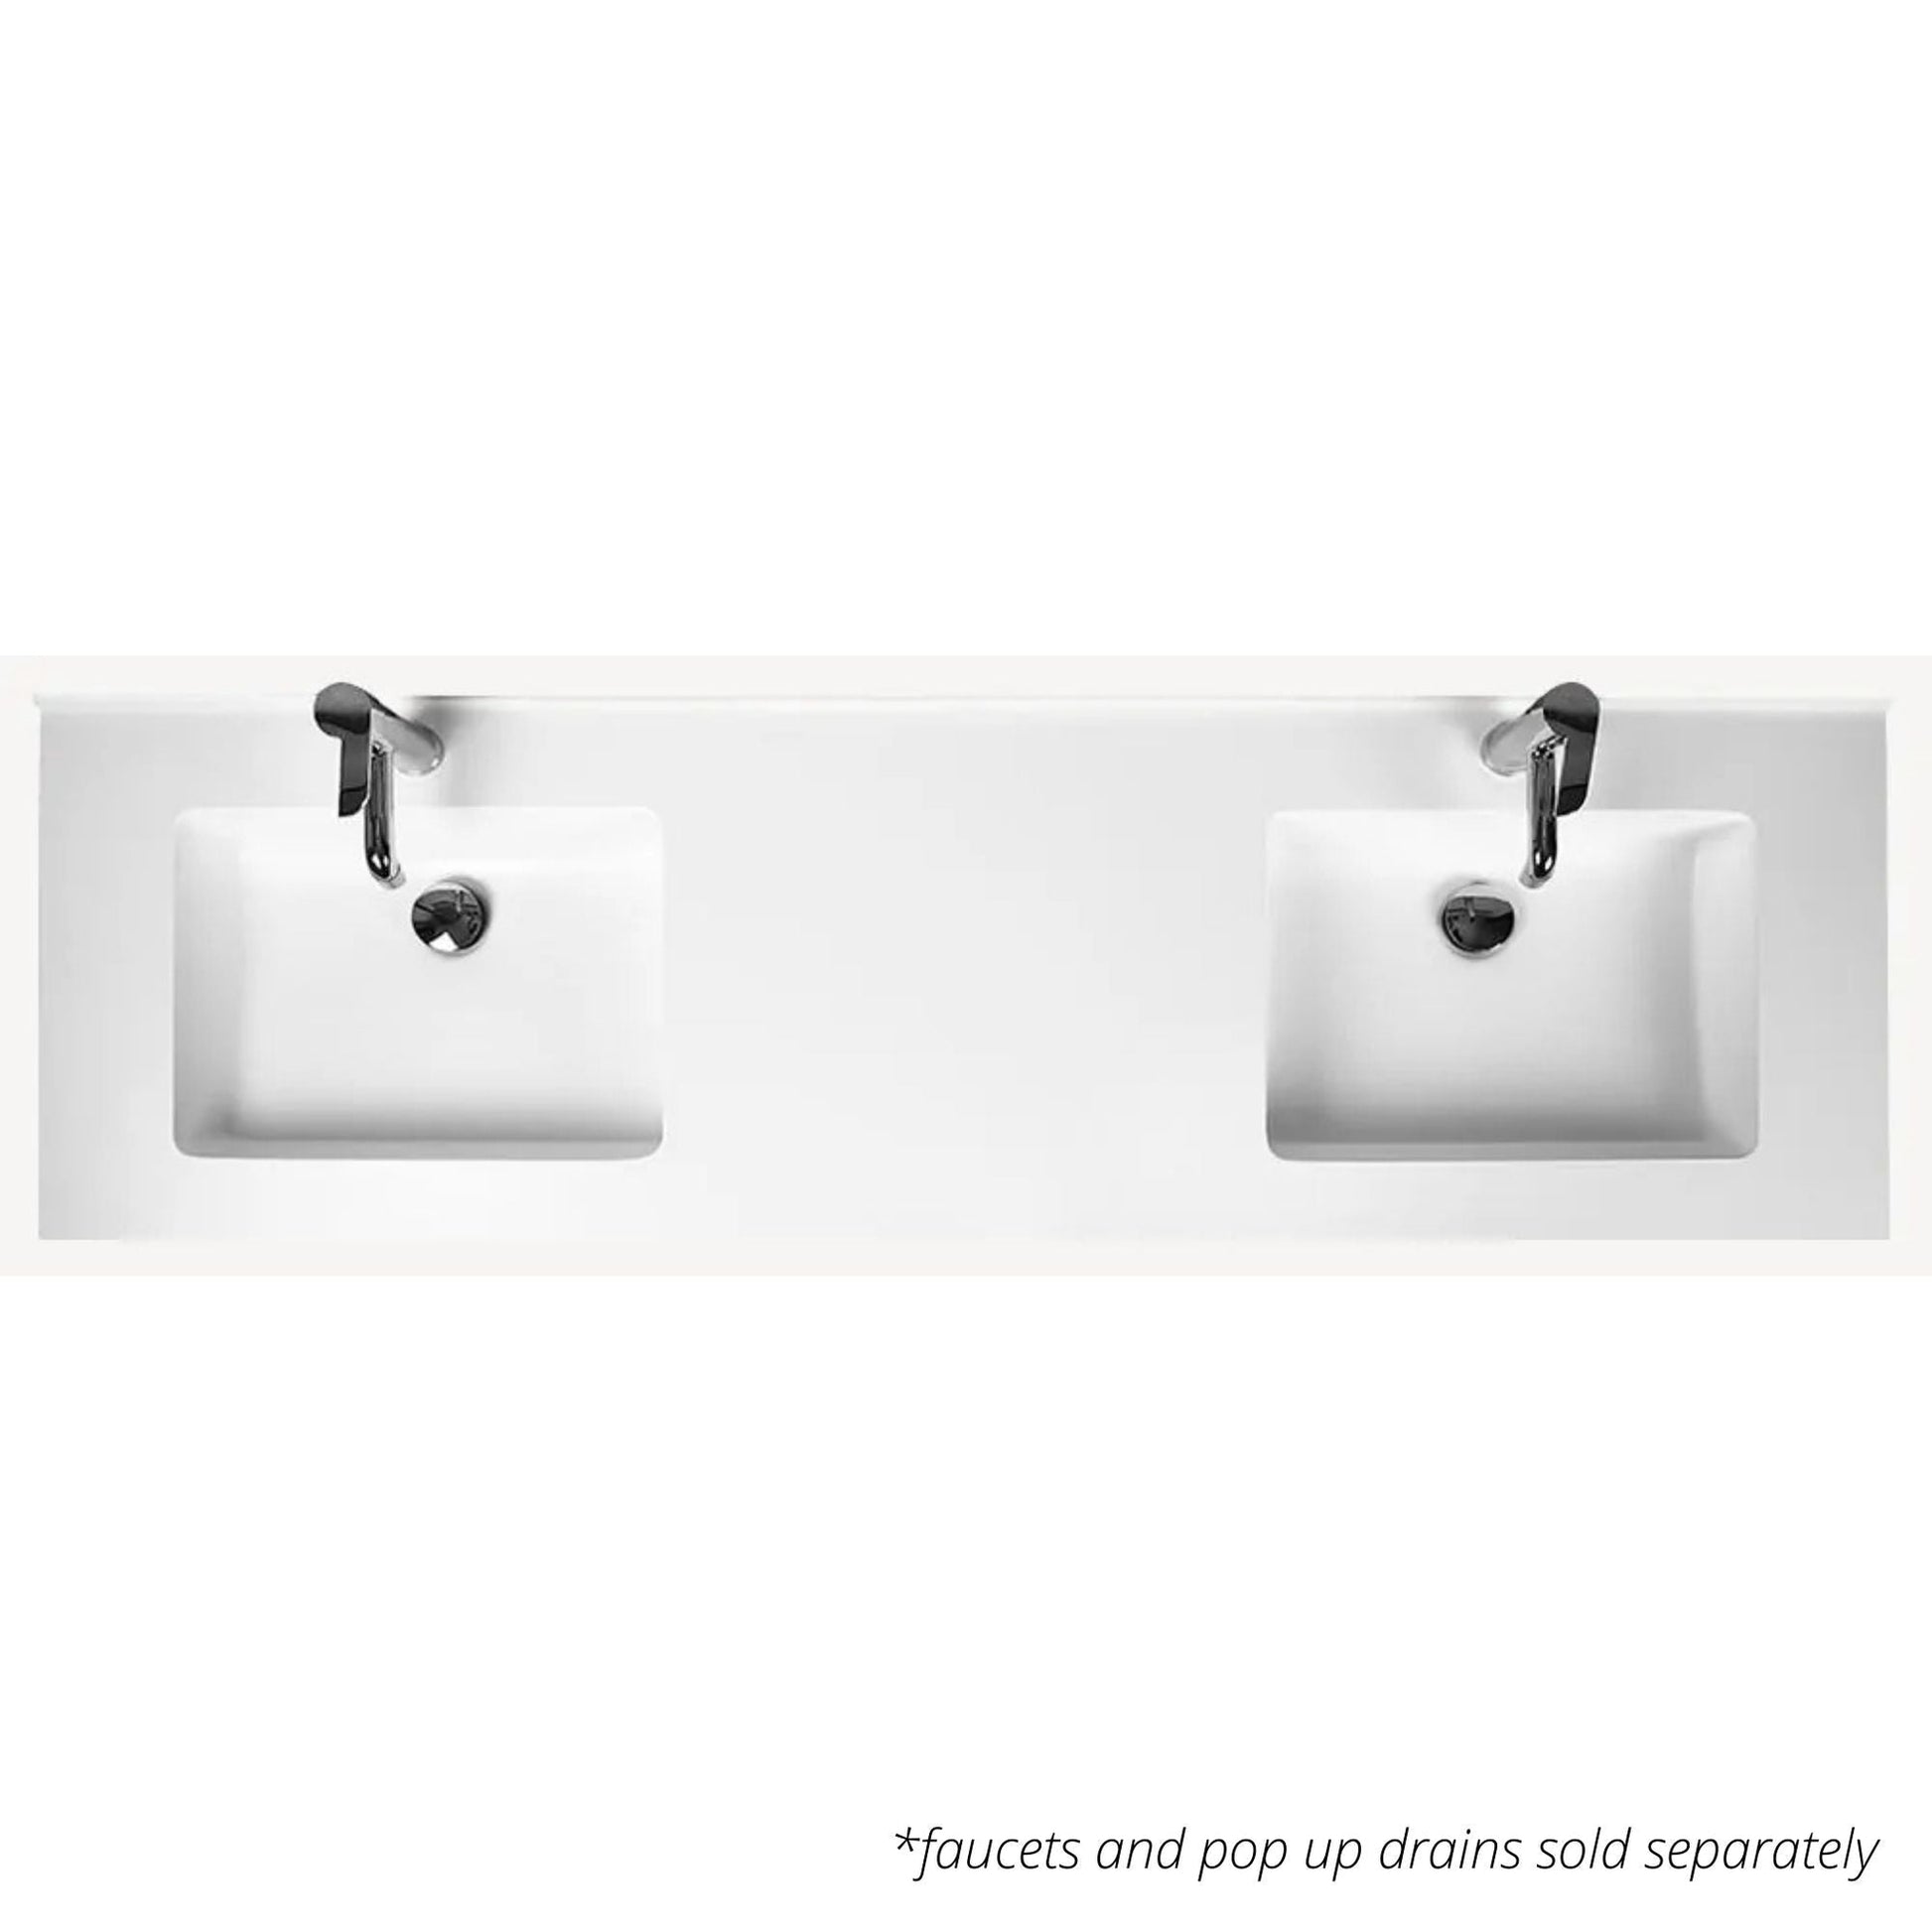 Casa Mare Benna 63" Glossy White Bathroom Vanity and Acrylic Double Sink Combo with LED Mirror